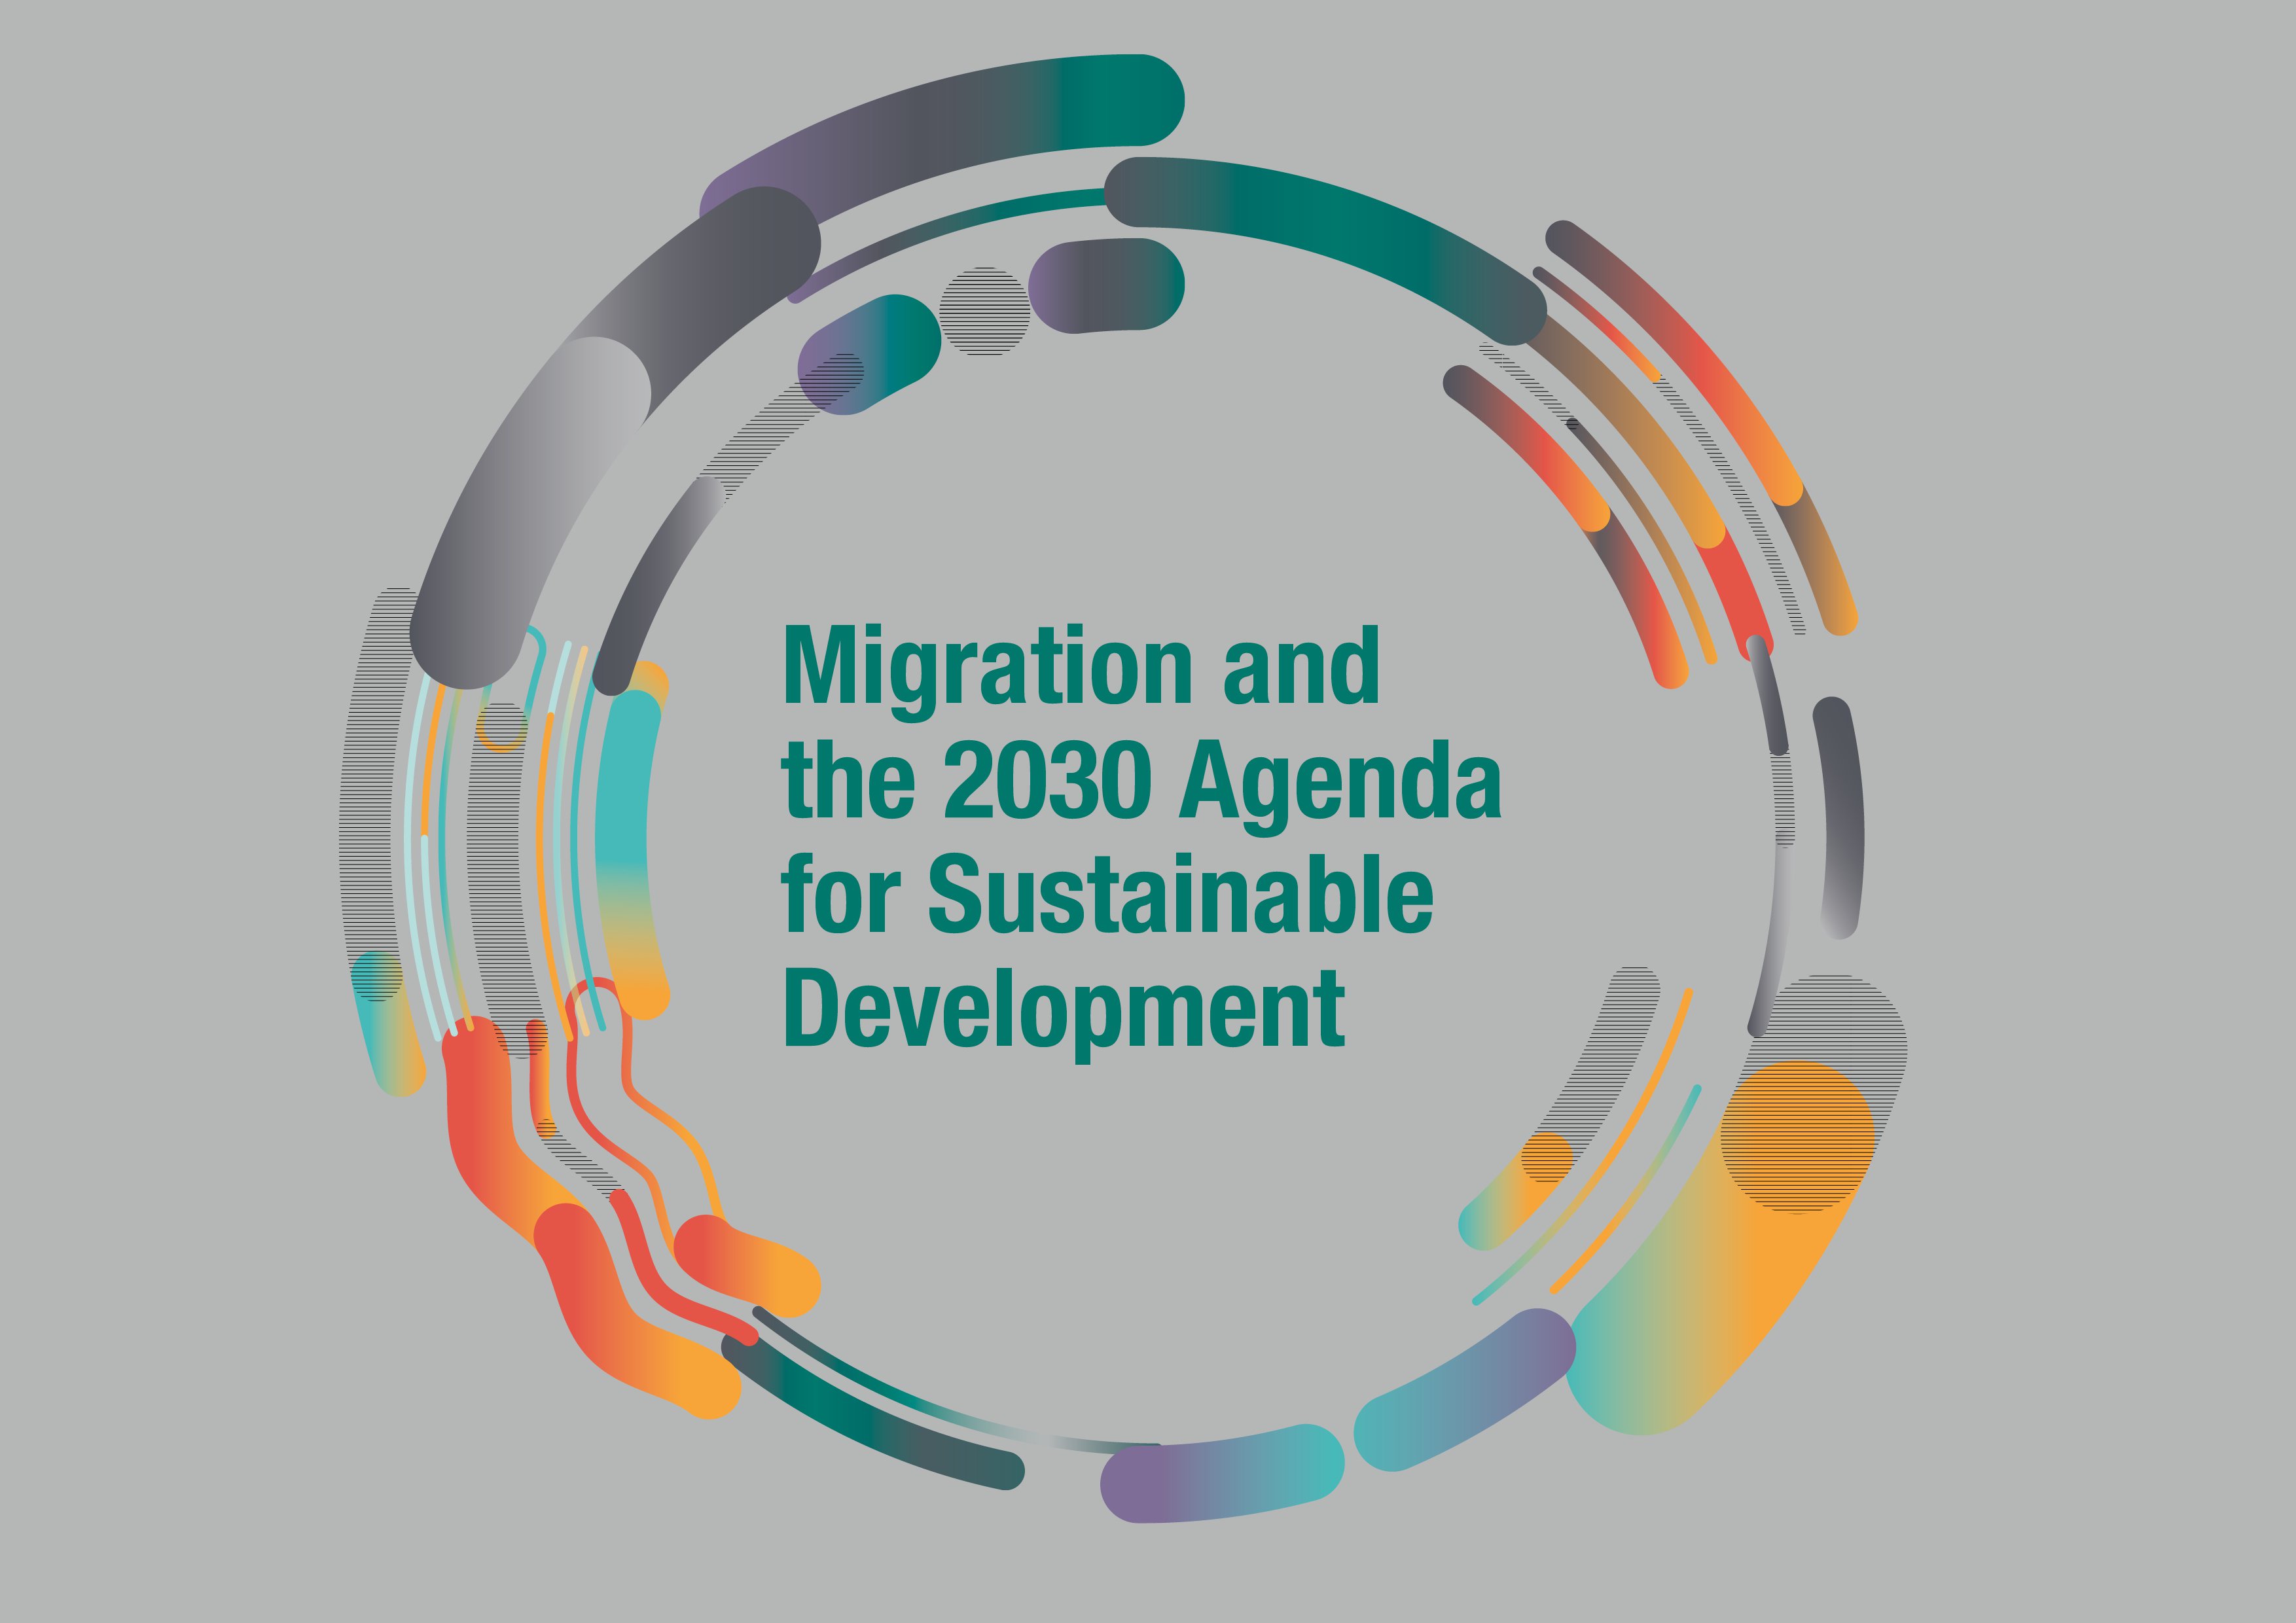 Migration and the 2030 Agenda for Sustainable Development